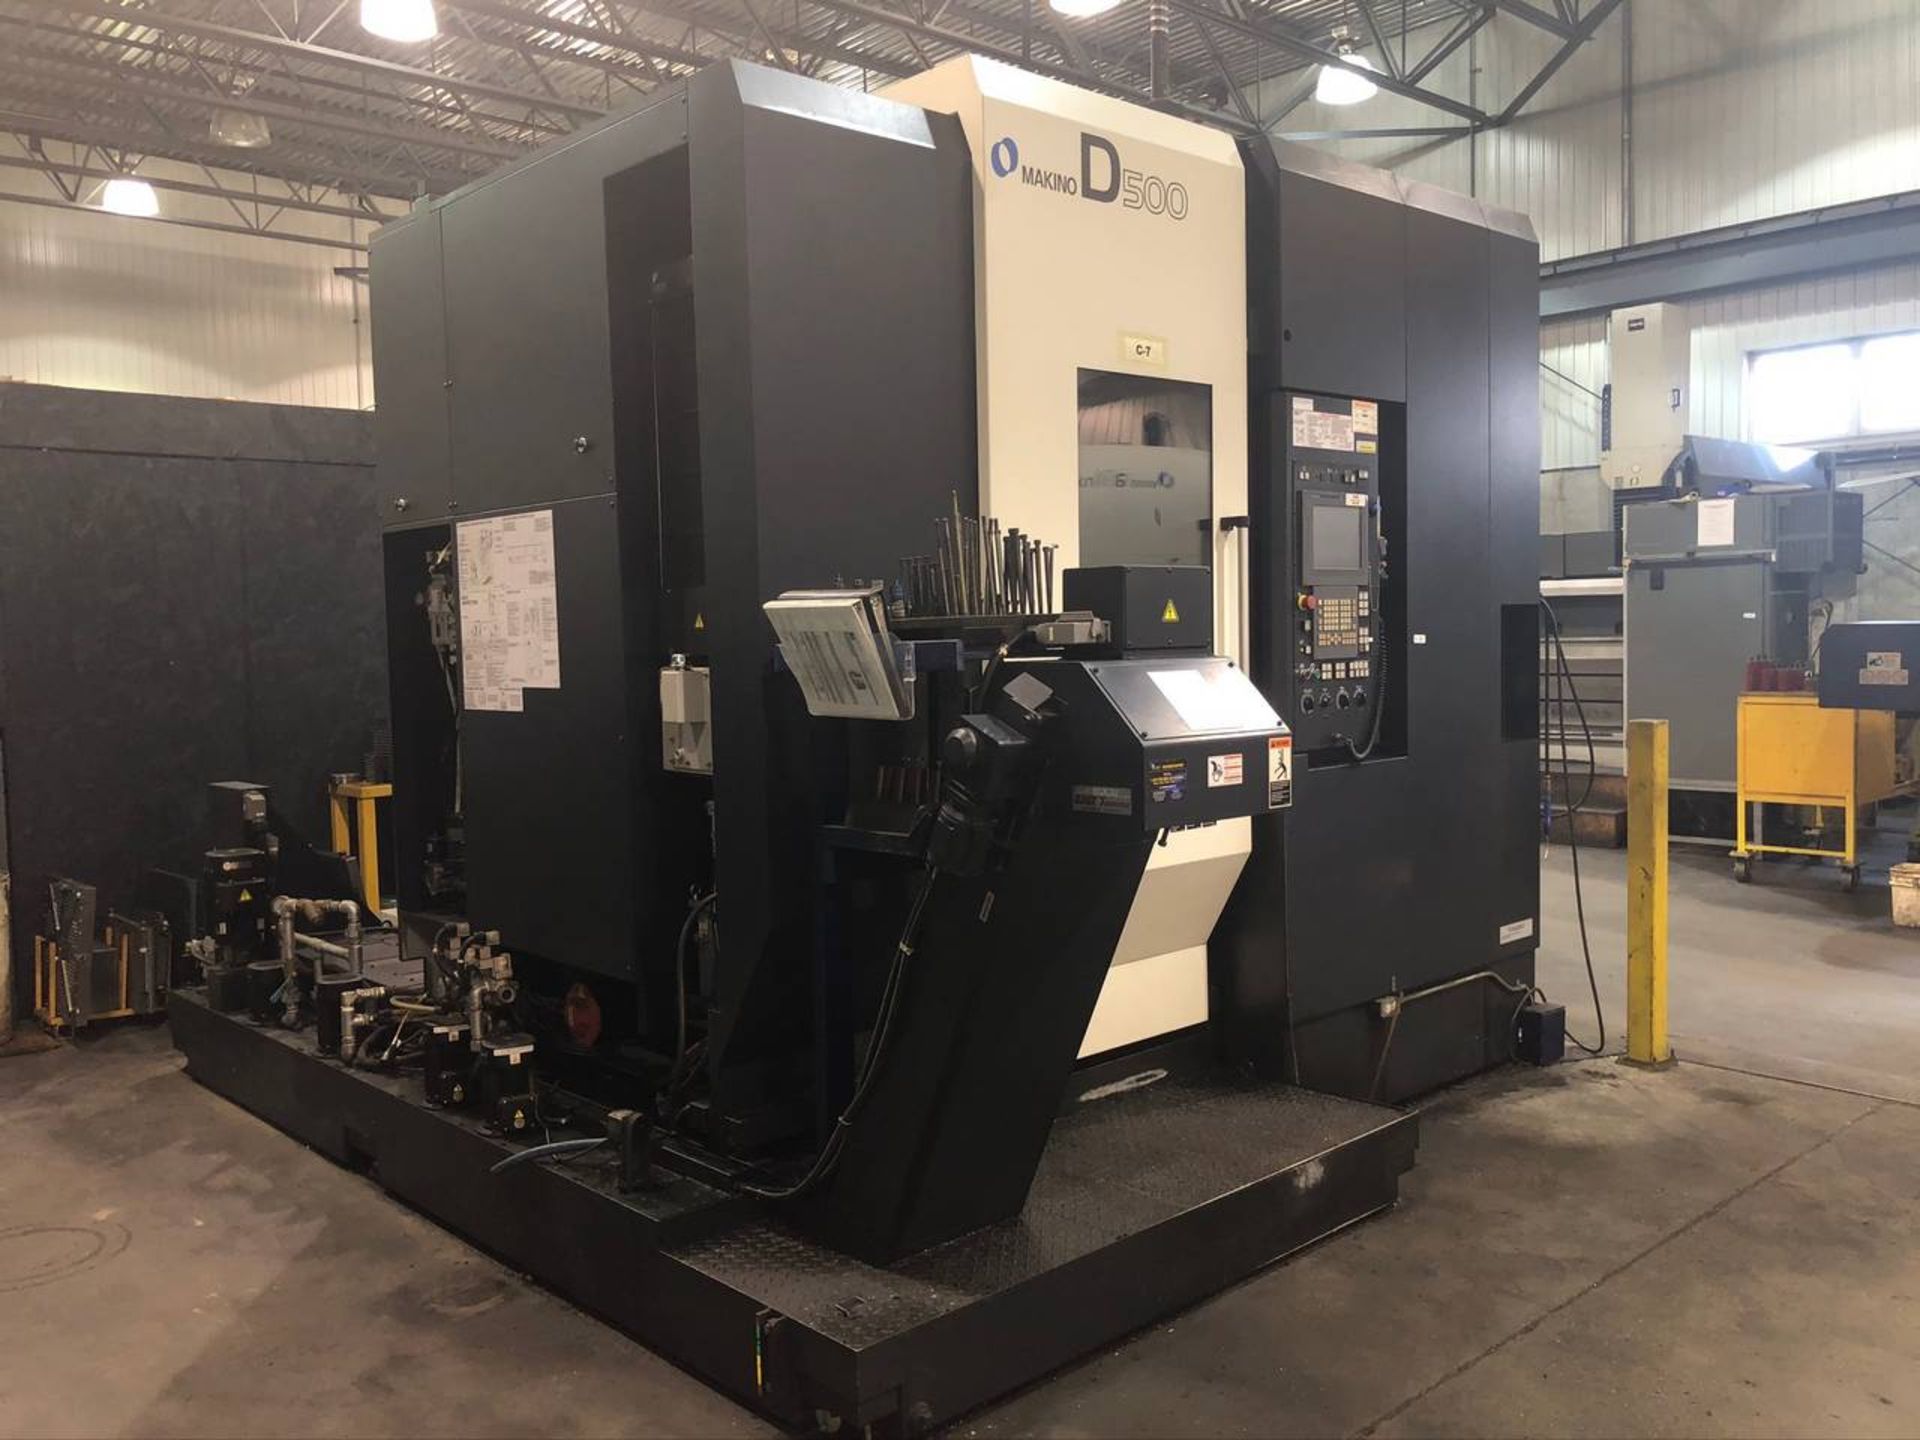 2012 Makino D500 5 Axis CNC Vertical Maching Center, - Image 3 of 7